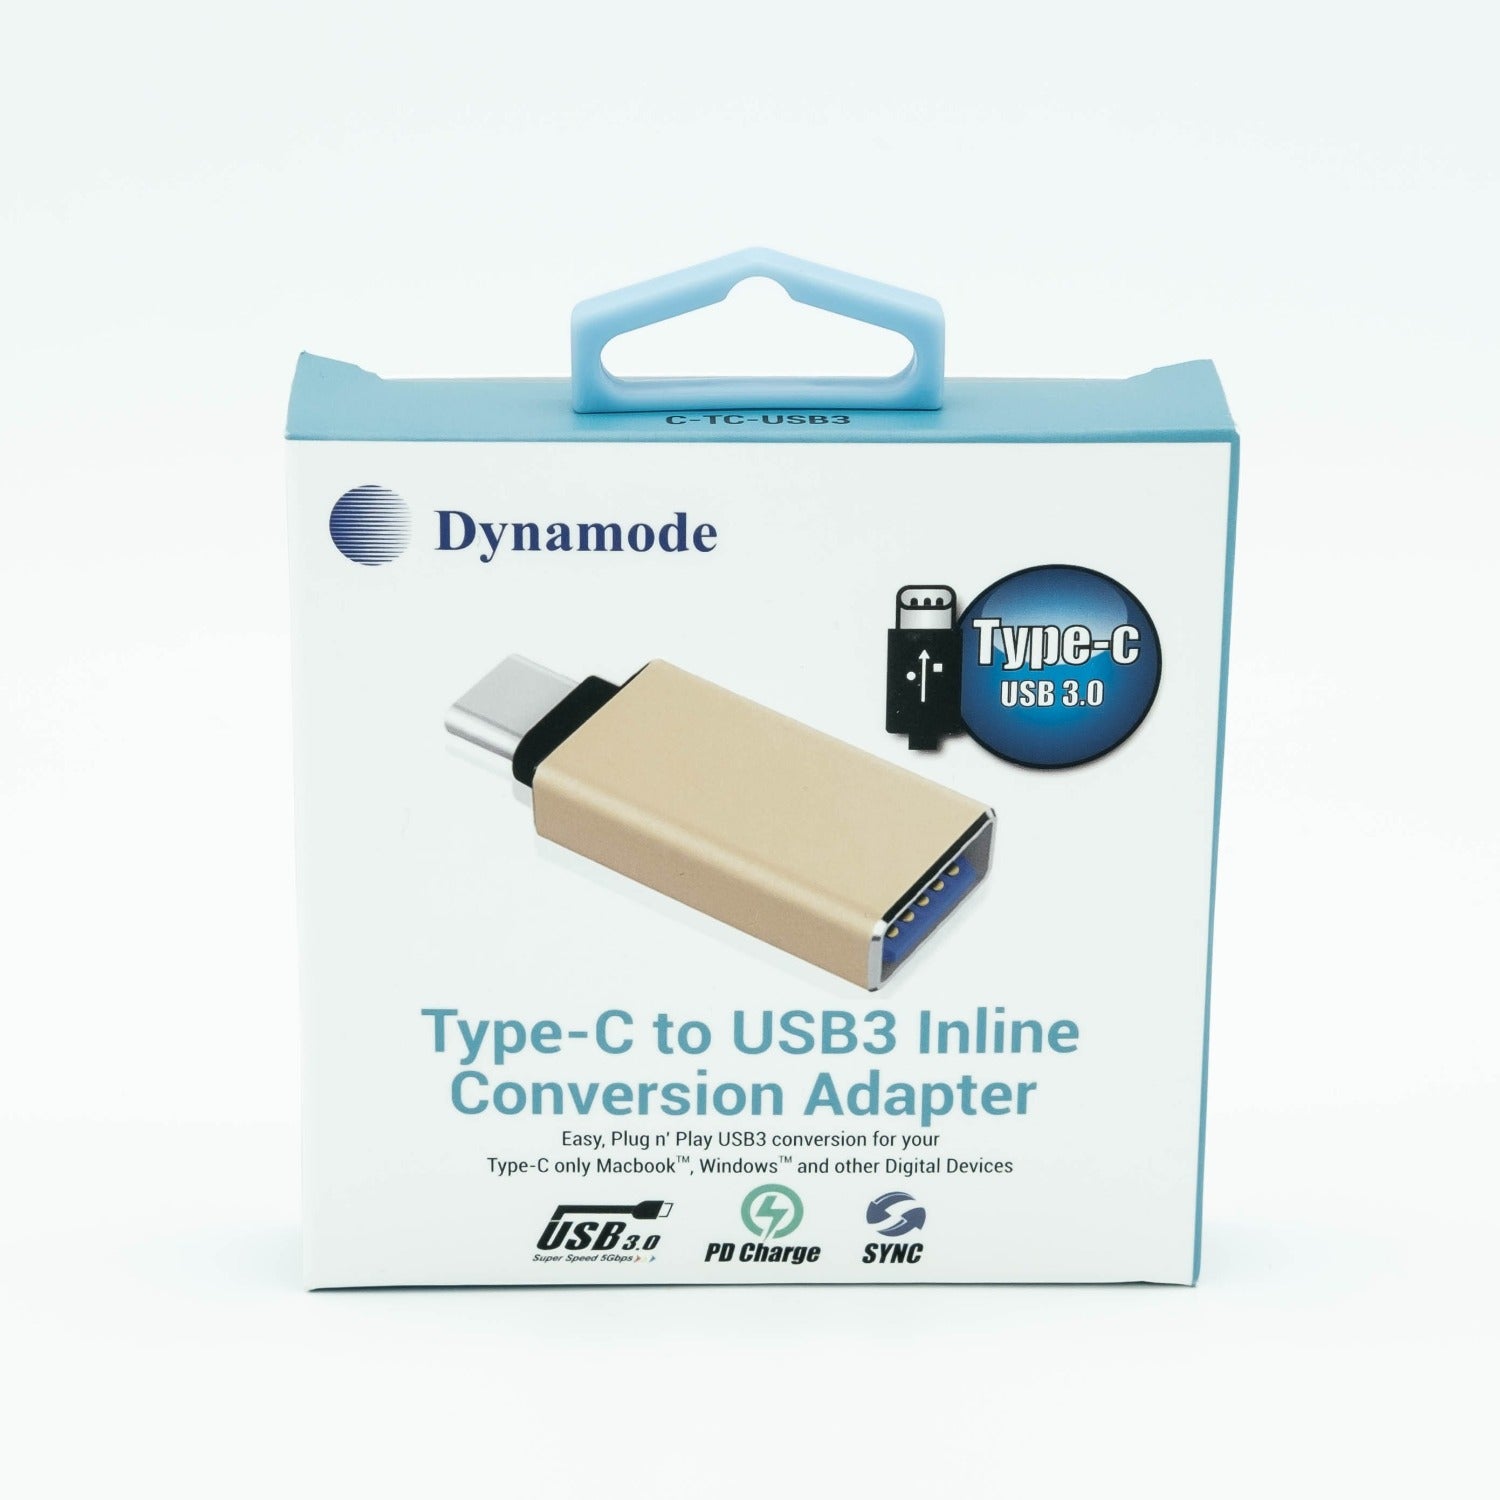 USB3.0 Type-C to USB Adapter - Usb Type C to Usb 3.0 Adapter